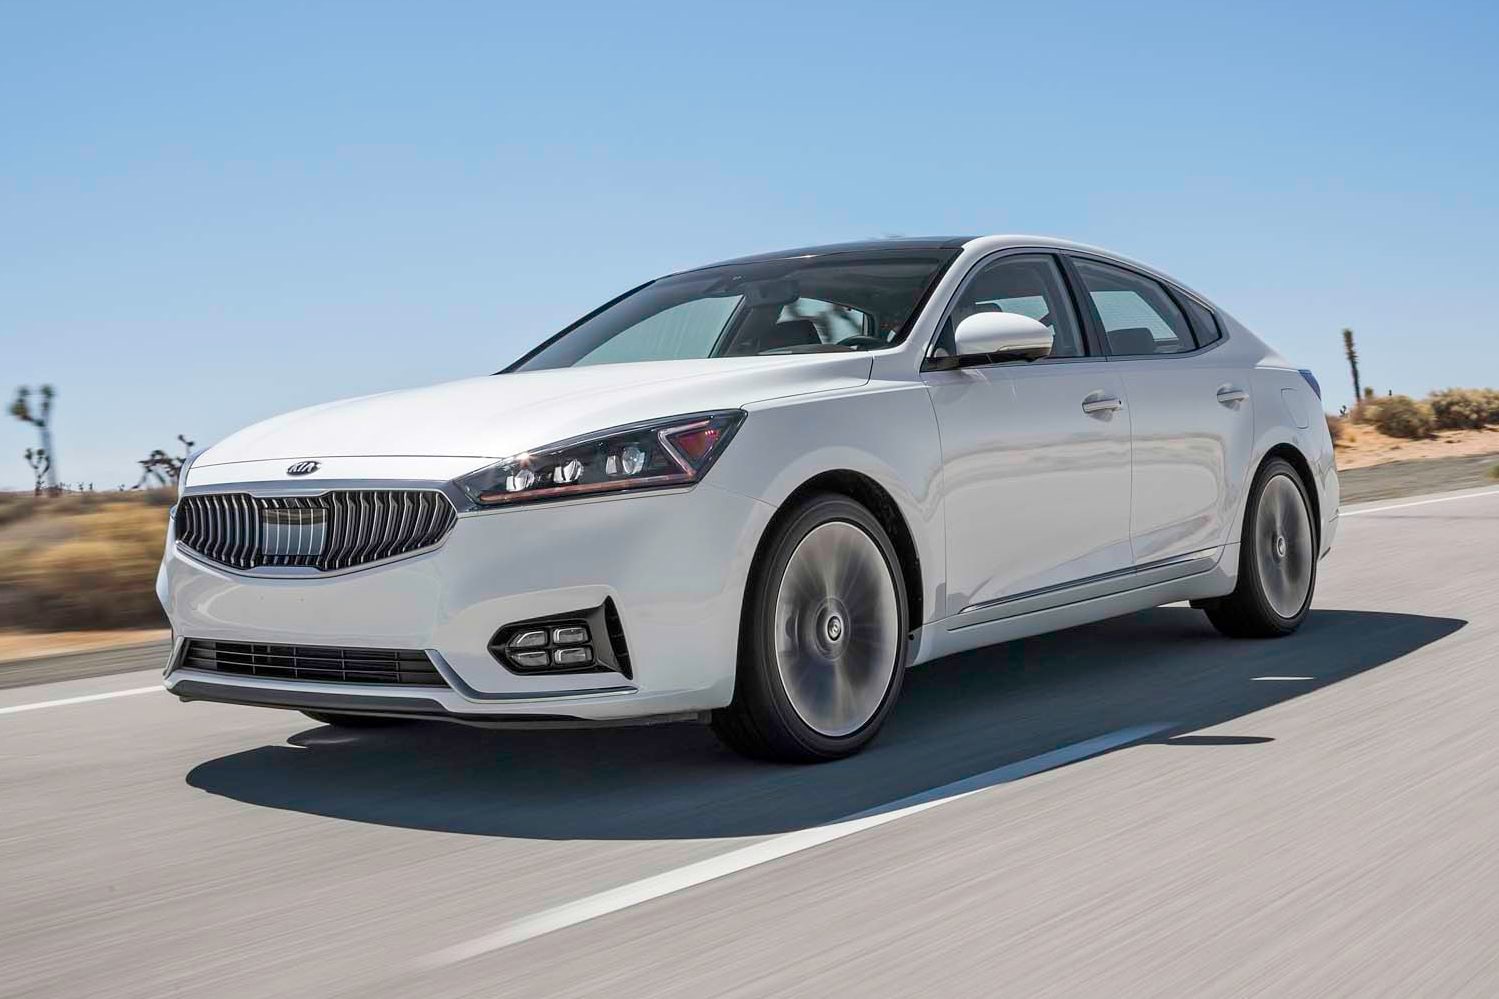 2017 Kia Cadenza First Test: Built for Comfort...